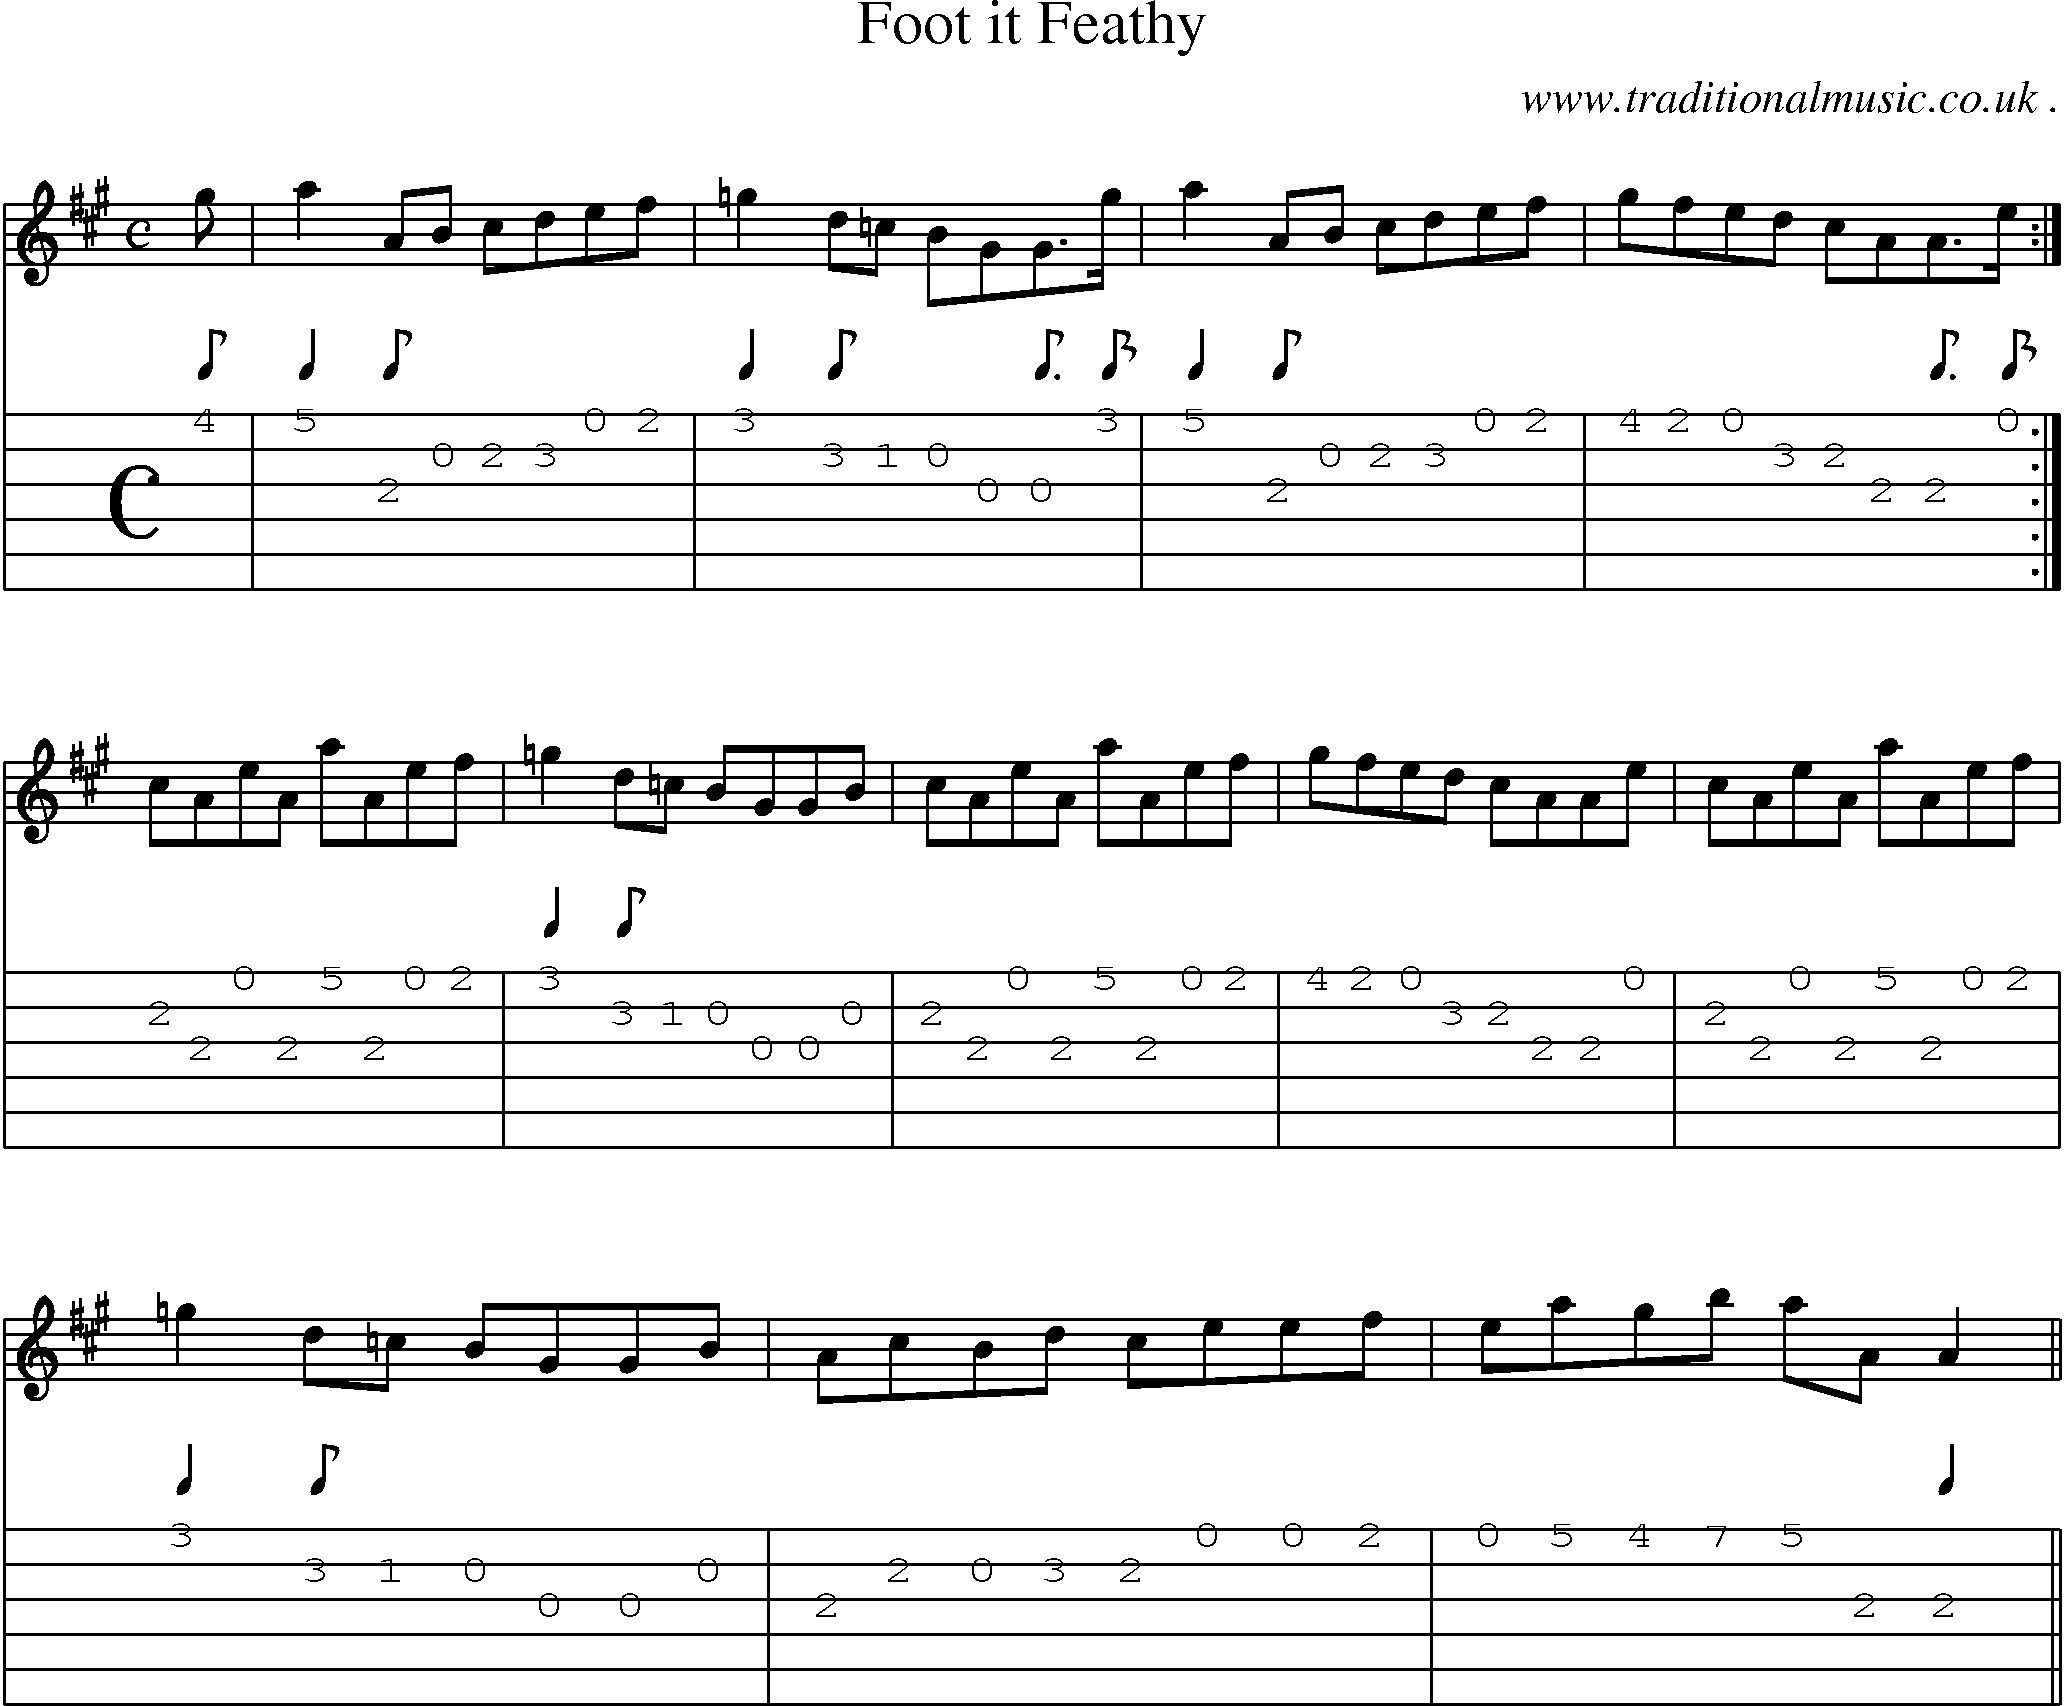 Sheet-music  score, Chords and Guitar Tabs for Foot It Feathy